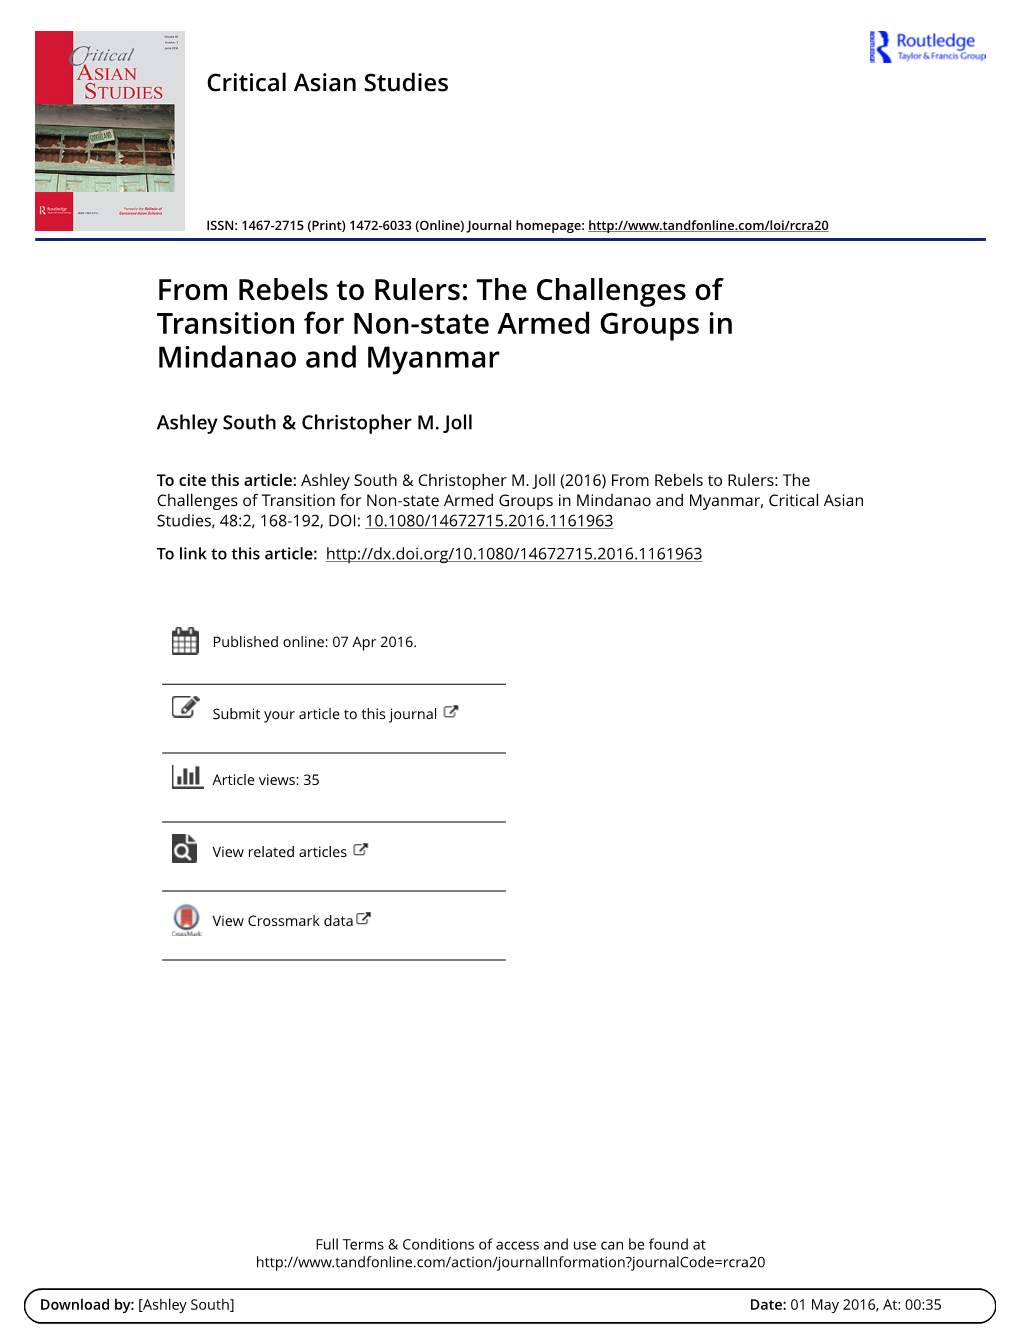 From Rebels to Rulers: the Challenges of Transition for Non-State Armed Groups in Mindanao and Myanmar